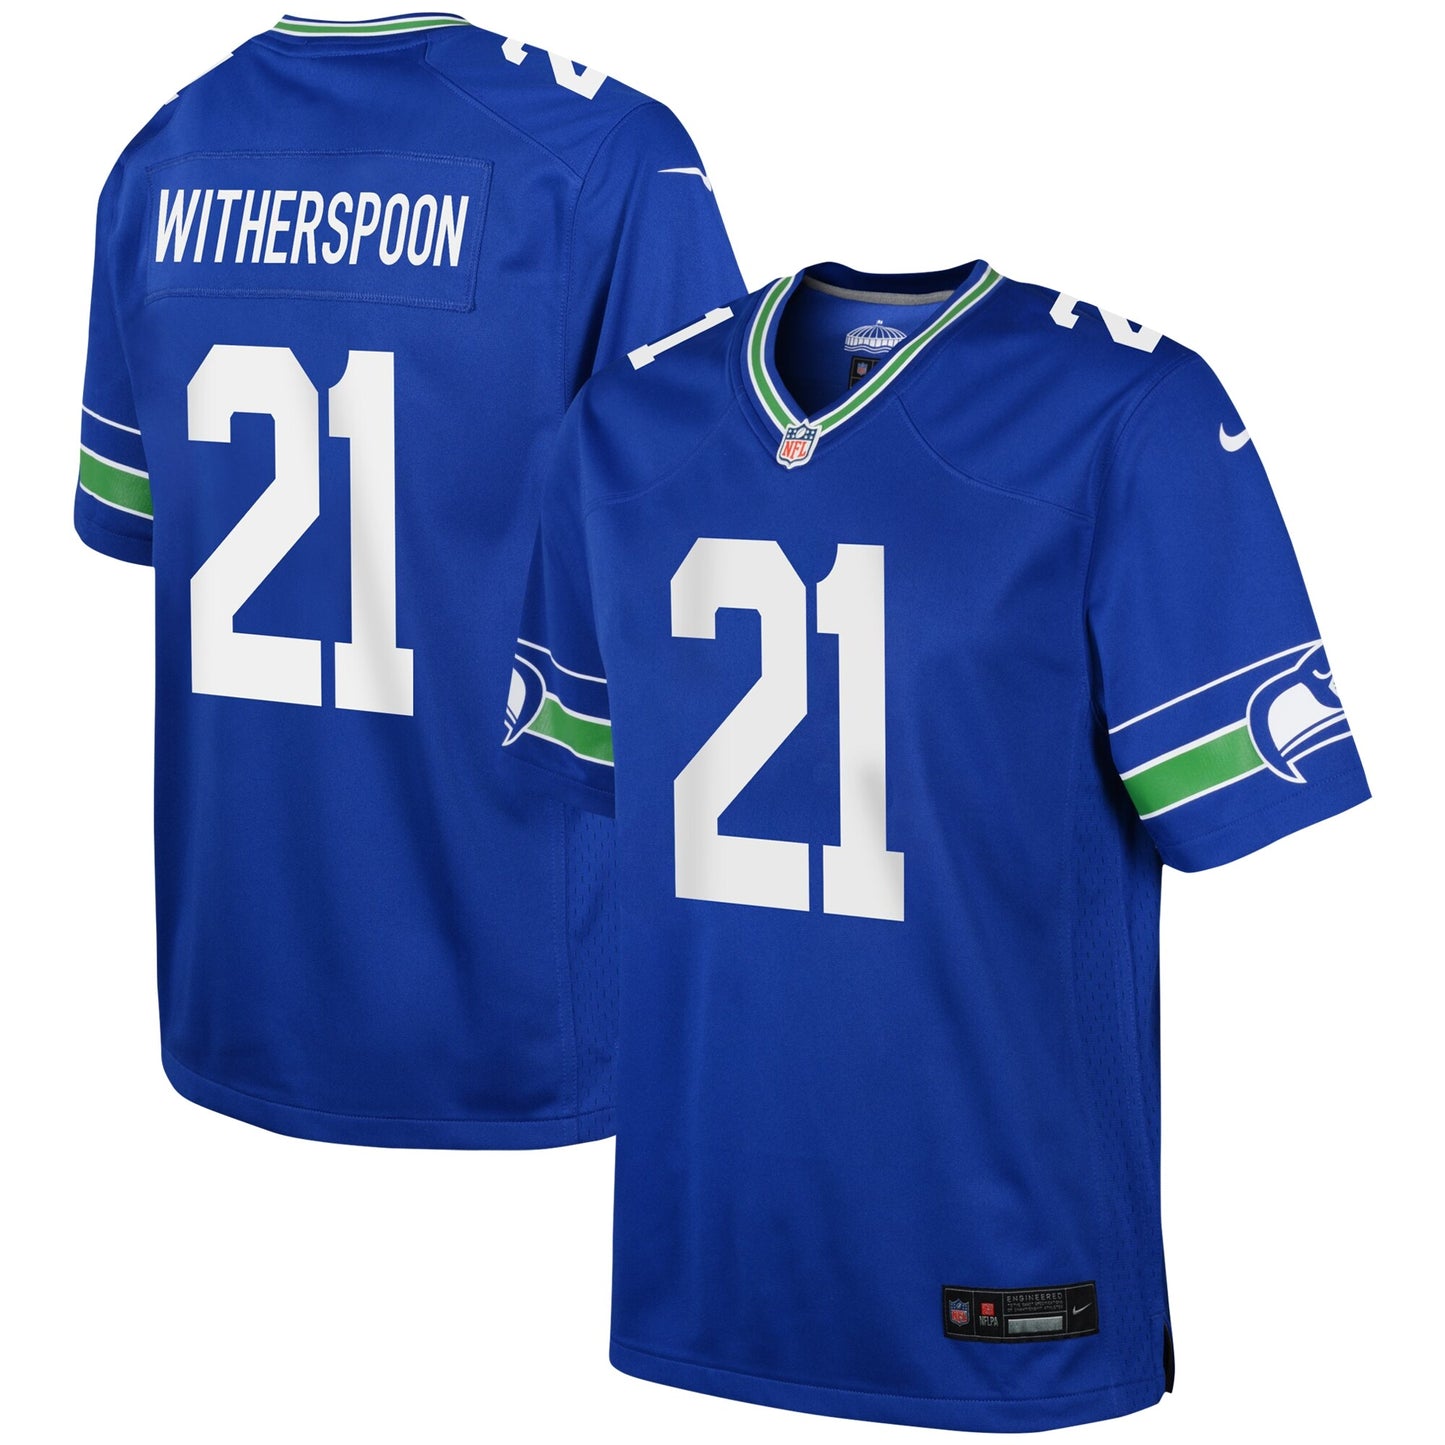 Devon Witherspoon Seattle Seahawks Nike Youth Game Jersey - Royal